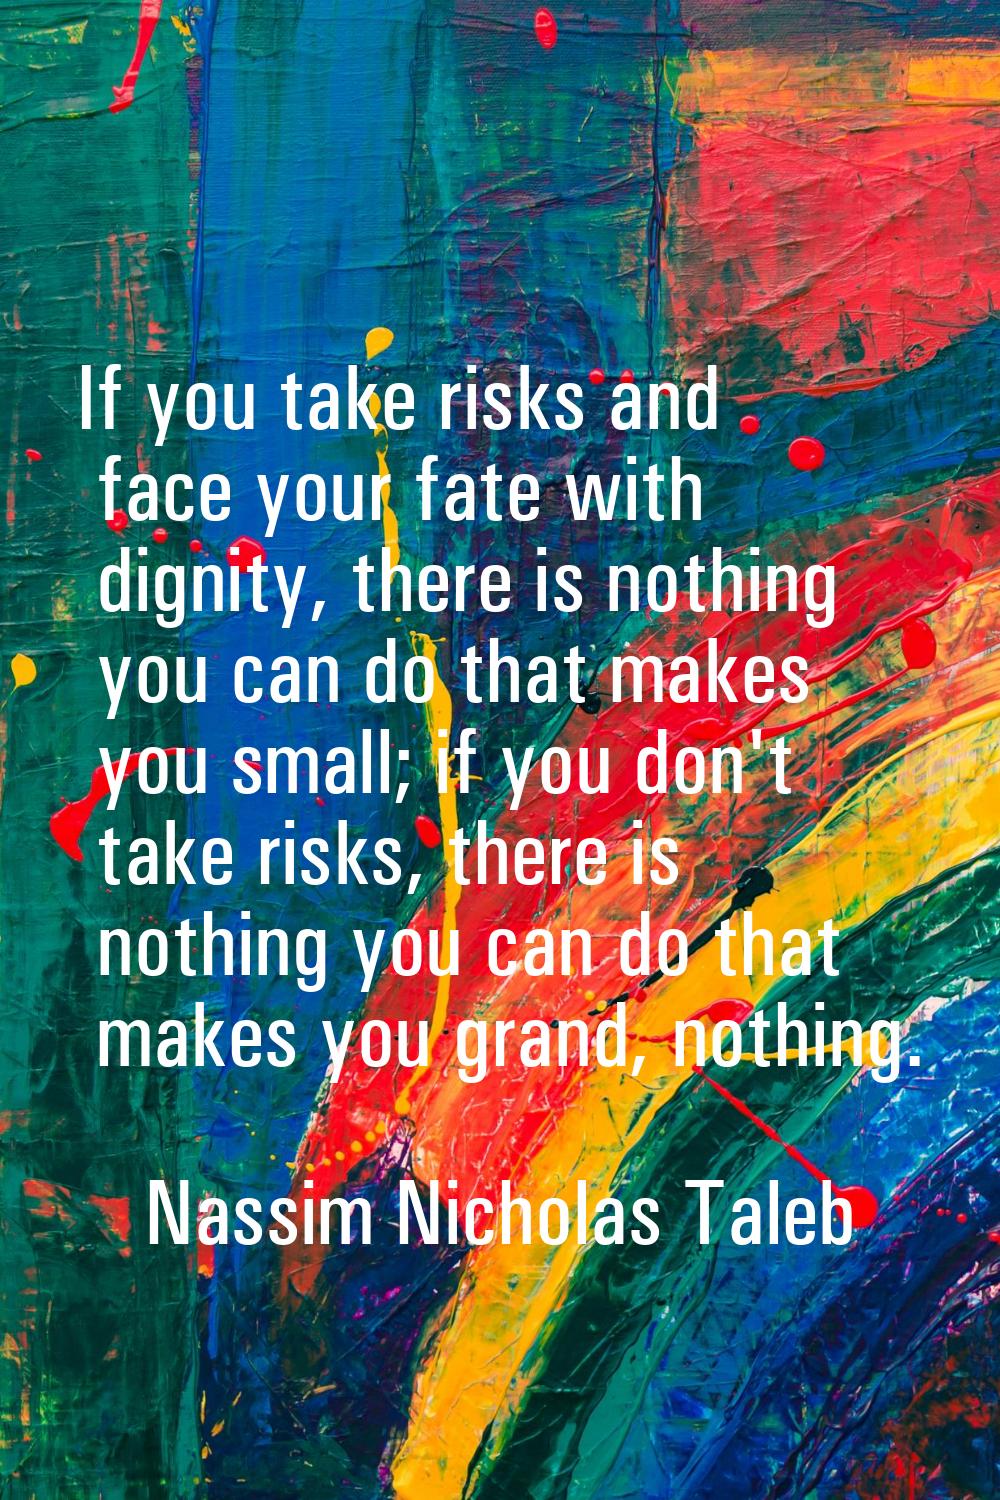 If you take risks and face your fate with dignity, there is nothing you can do that makes you small